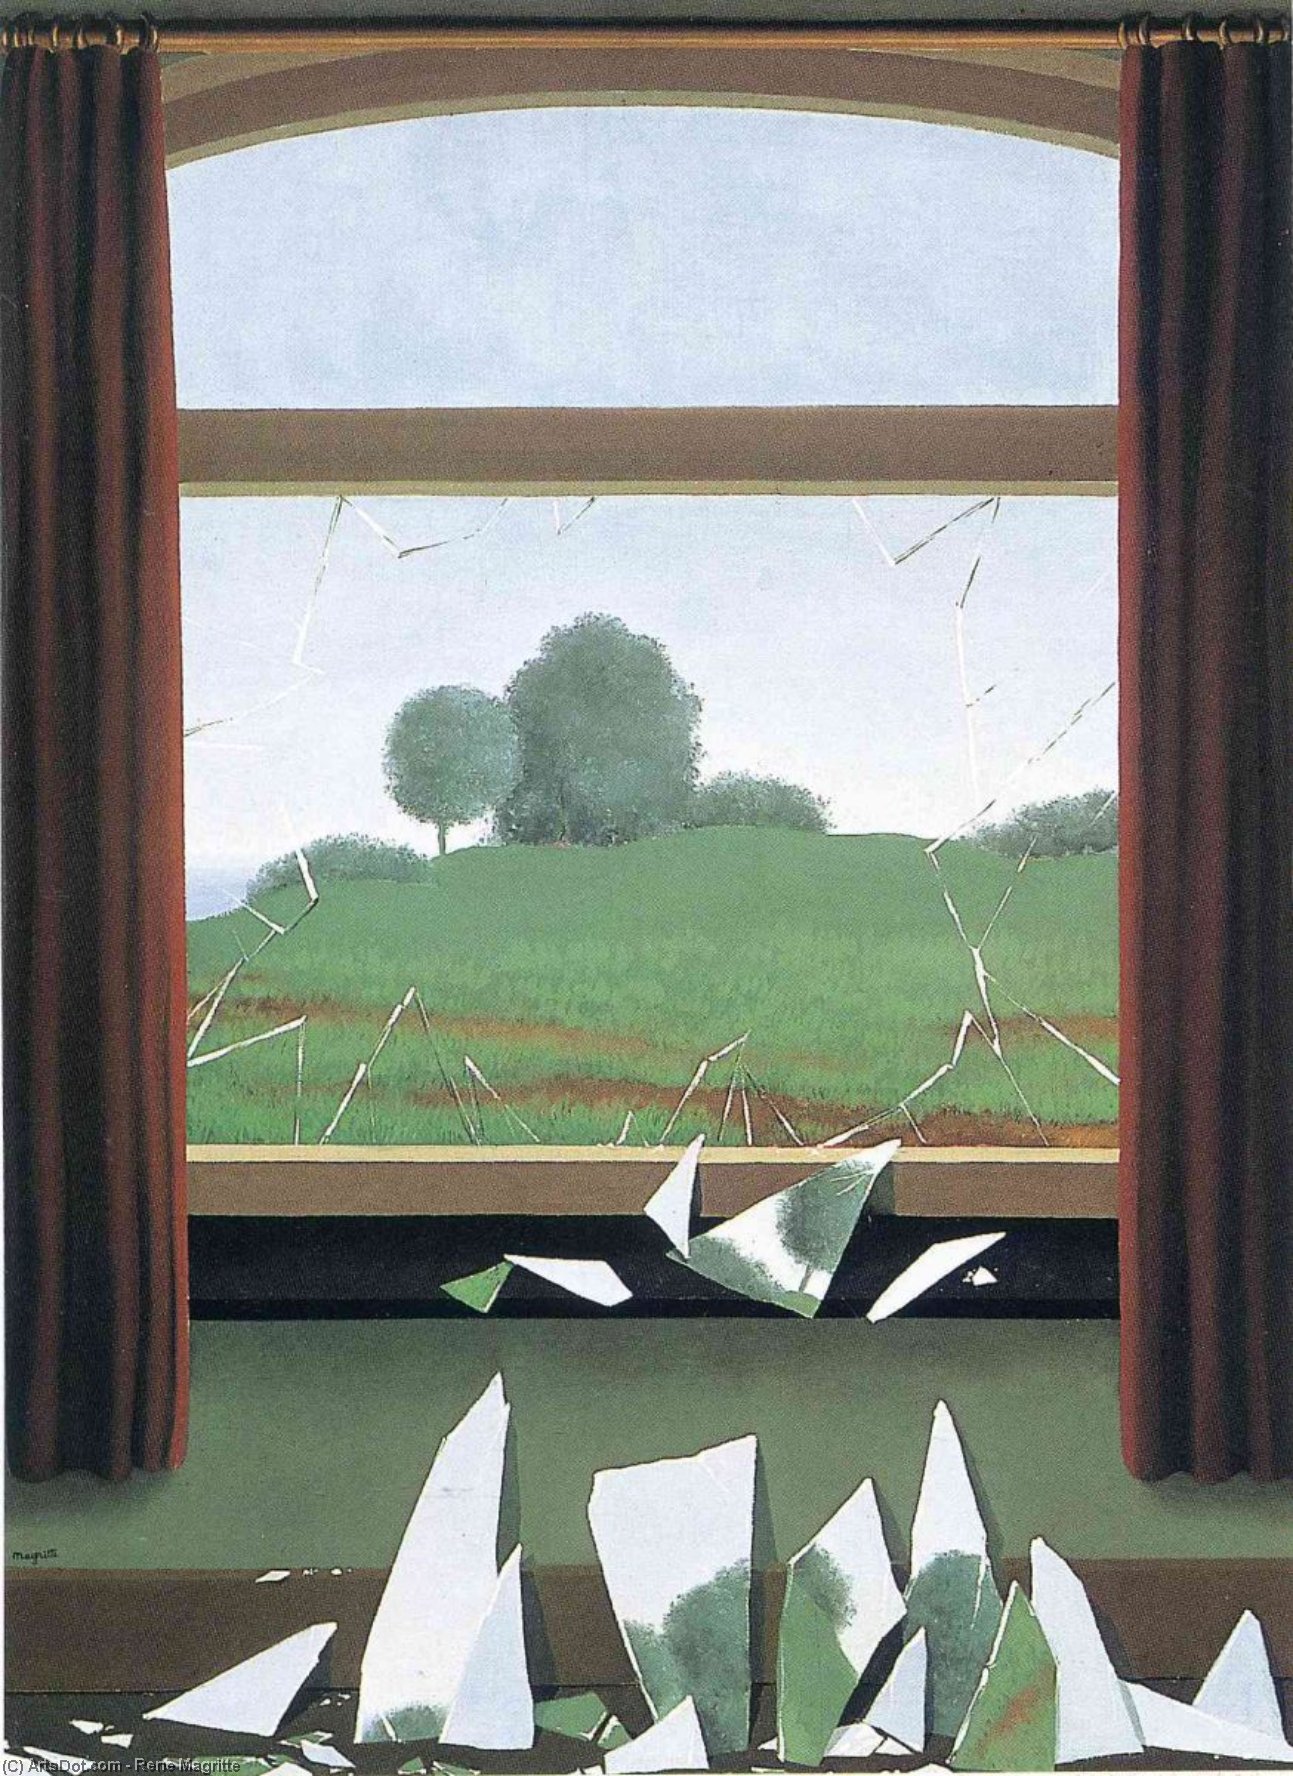 WikiOO.org - 백과 사전 - 회화, 삽화 Rene Magritte - The Key to the Fields